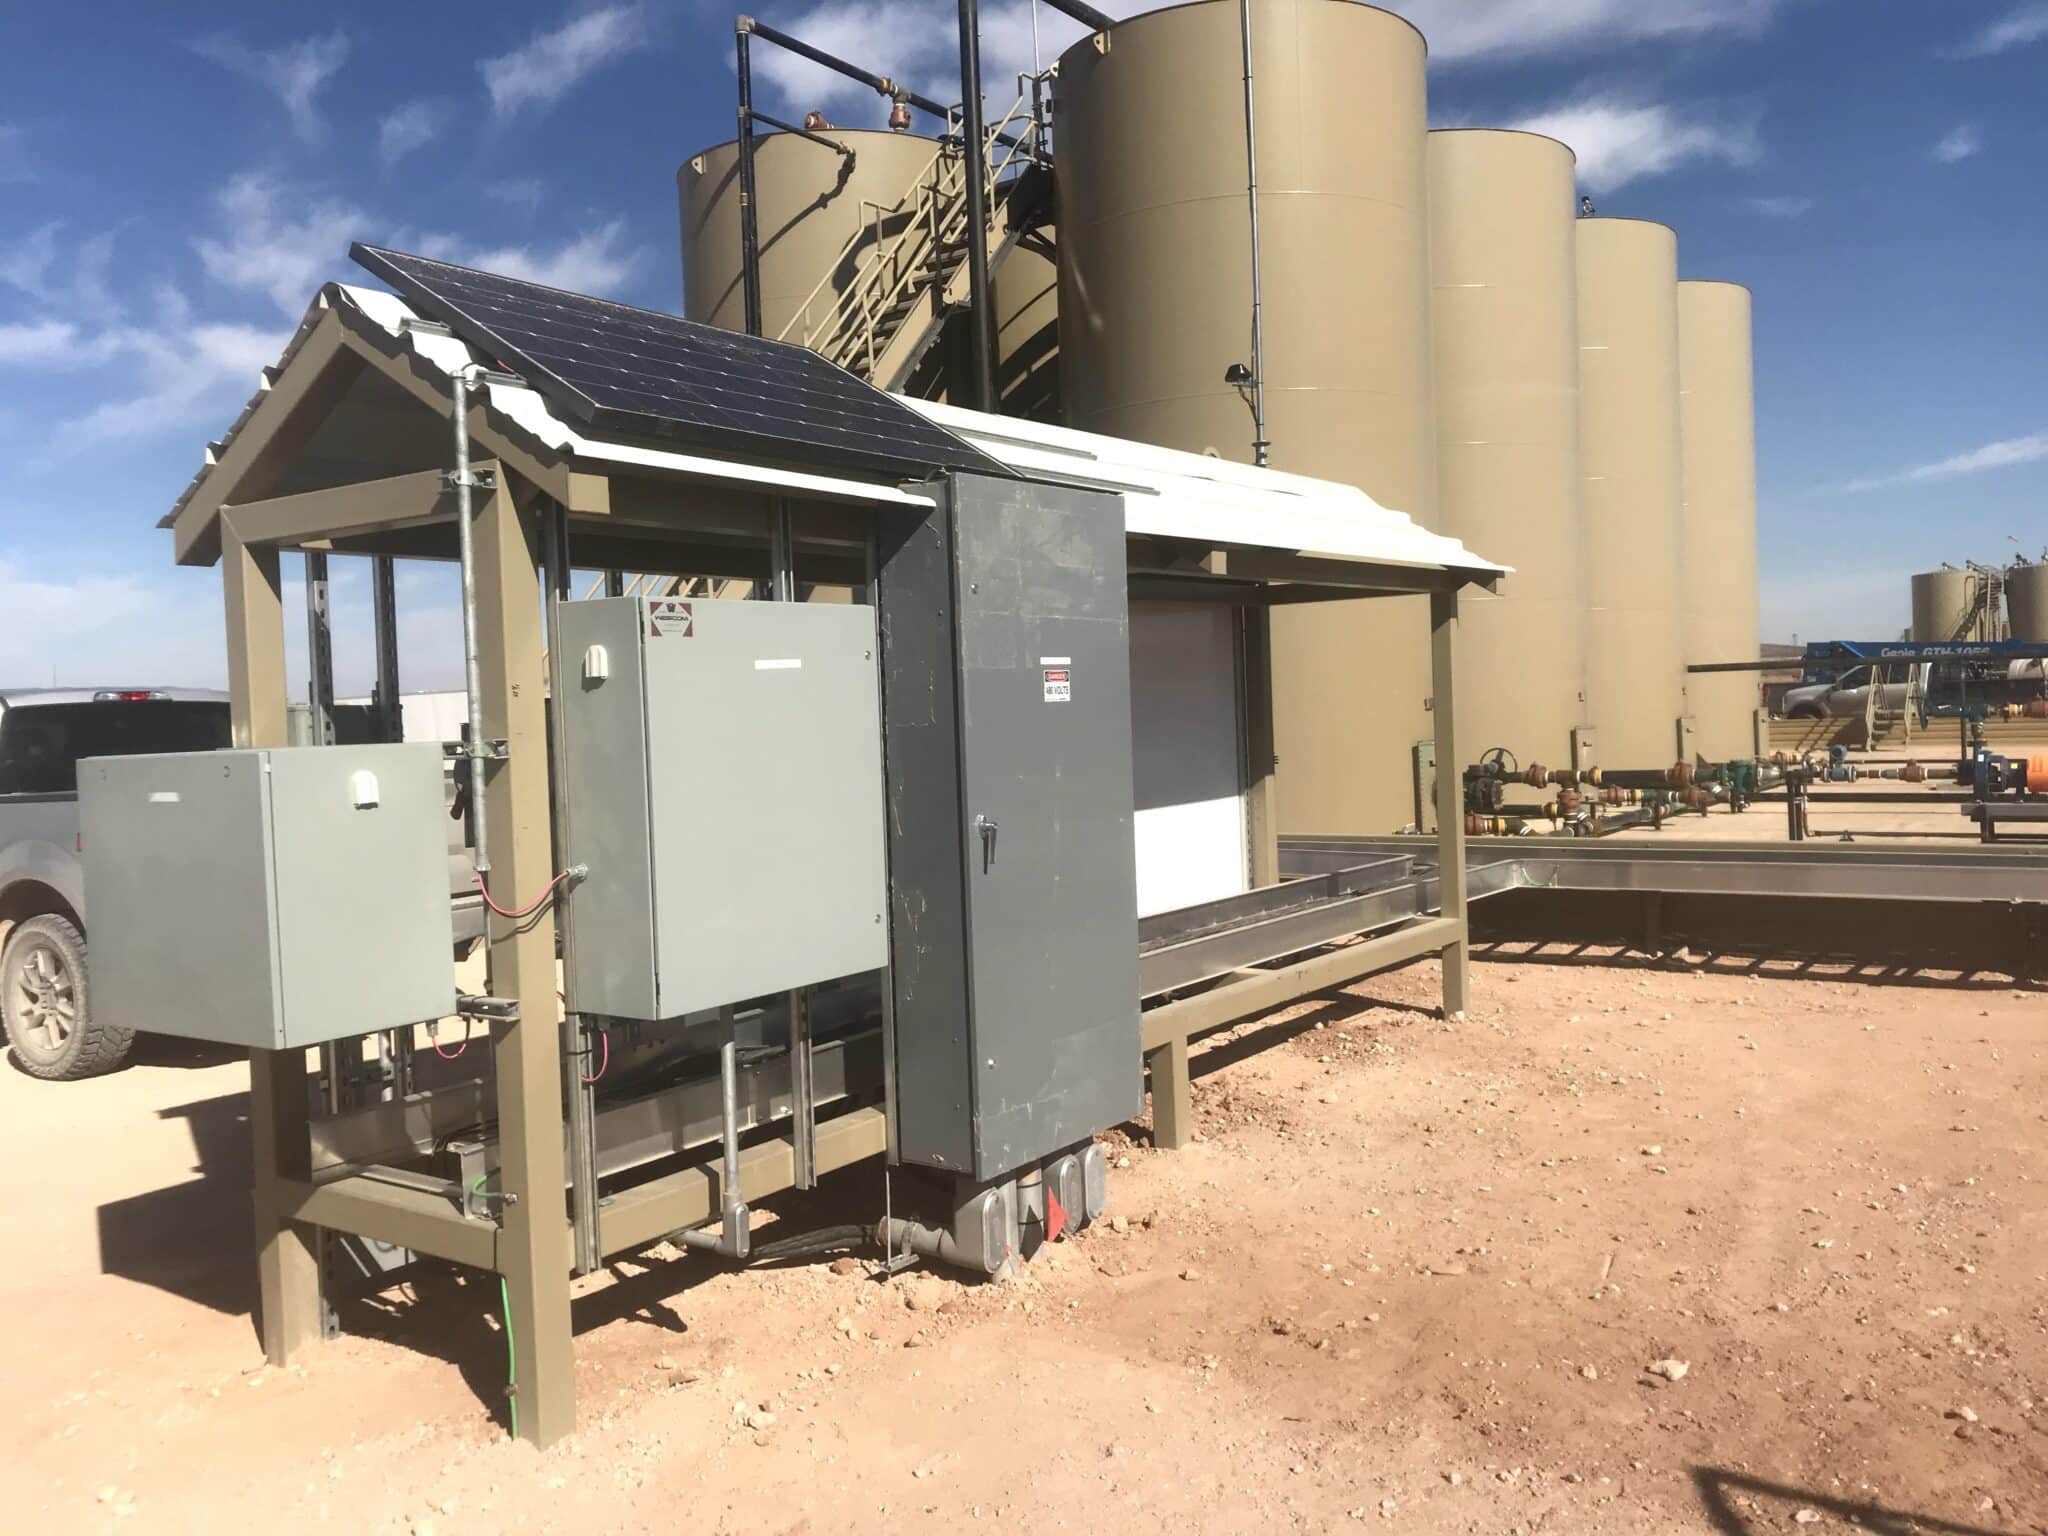 Small electrical hut with solar panels on jobsite